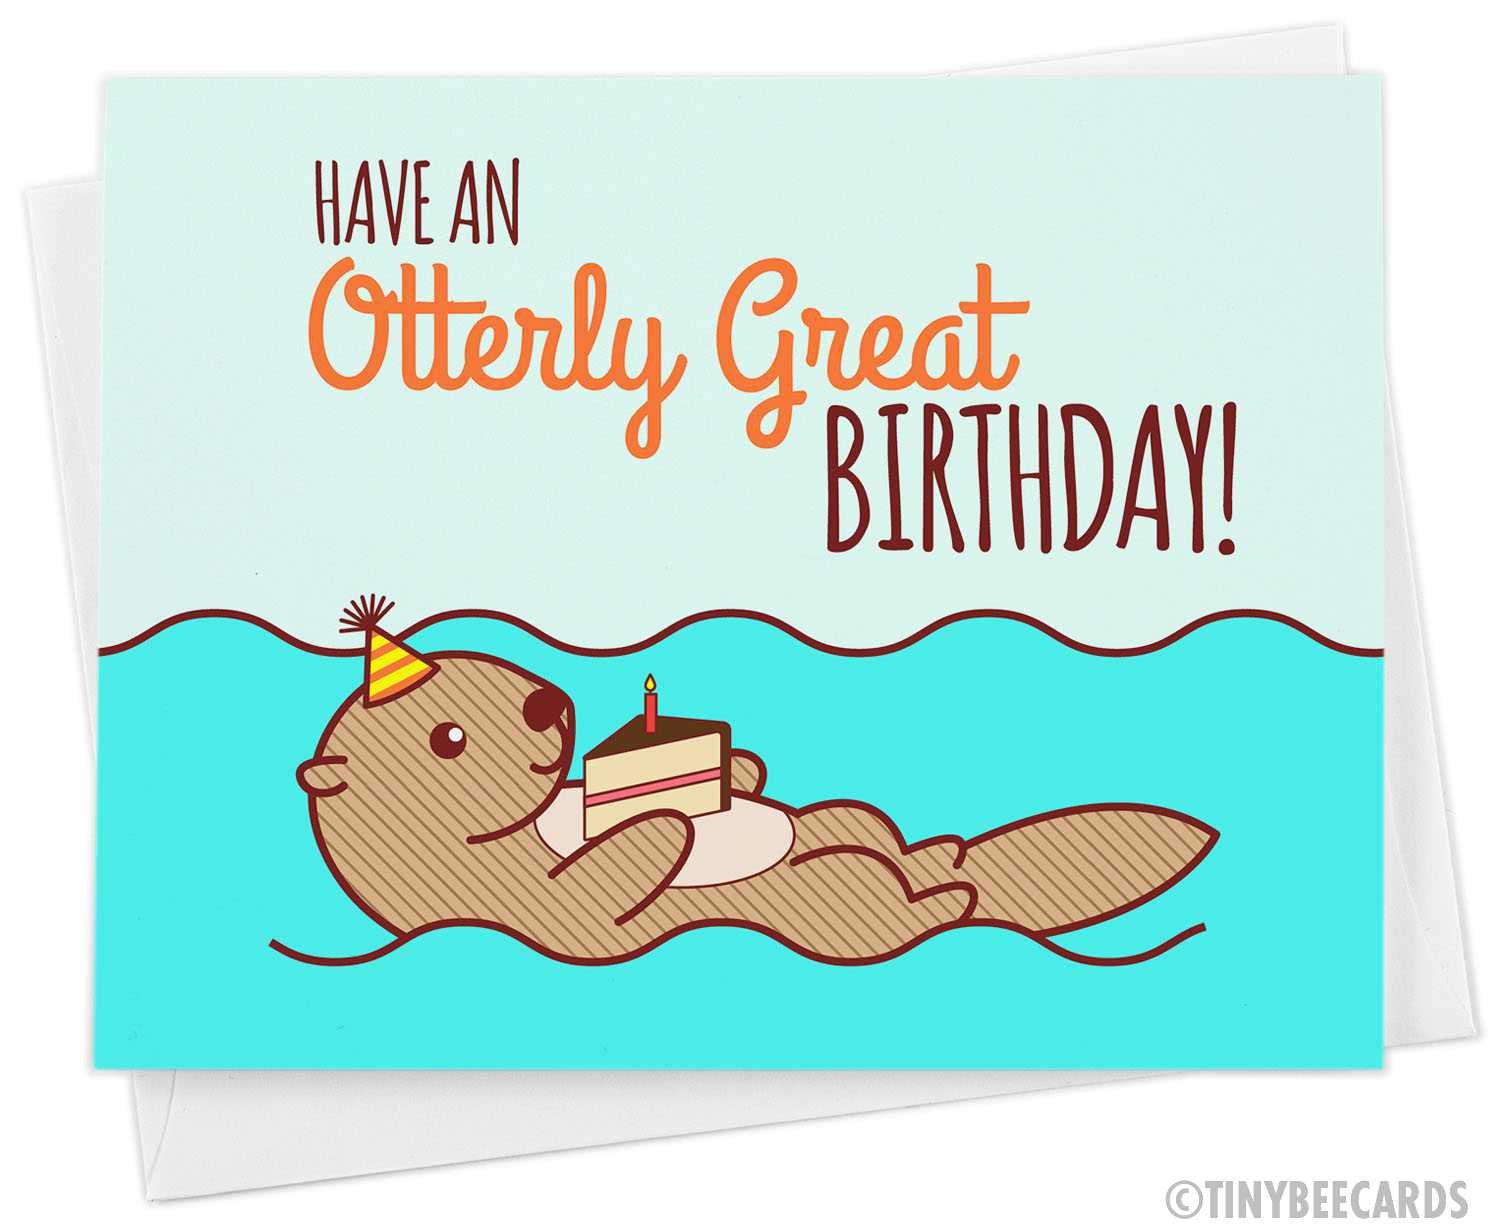 Funny Birthday Card "Have an Otterly Great Birthday!"